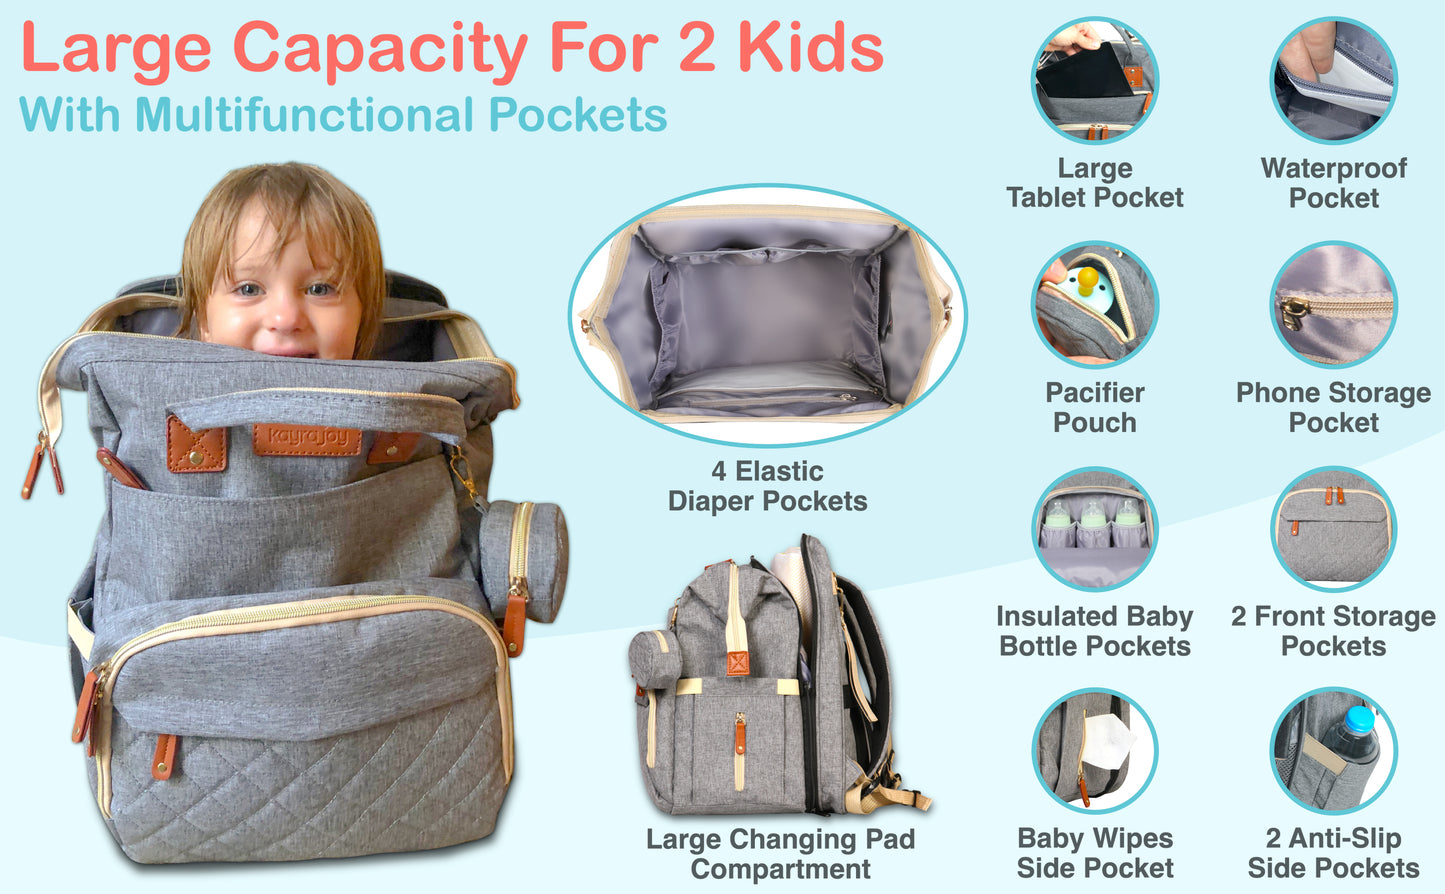 Large Capacity Diaper Bag for 2 Kids with Multifunctional Pockets